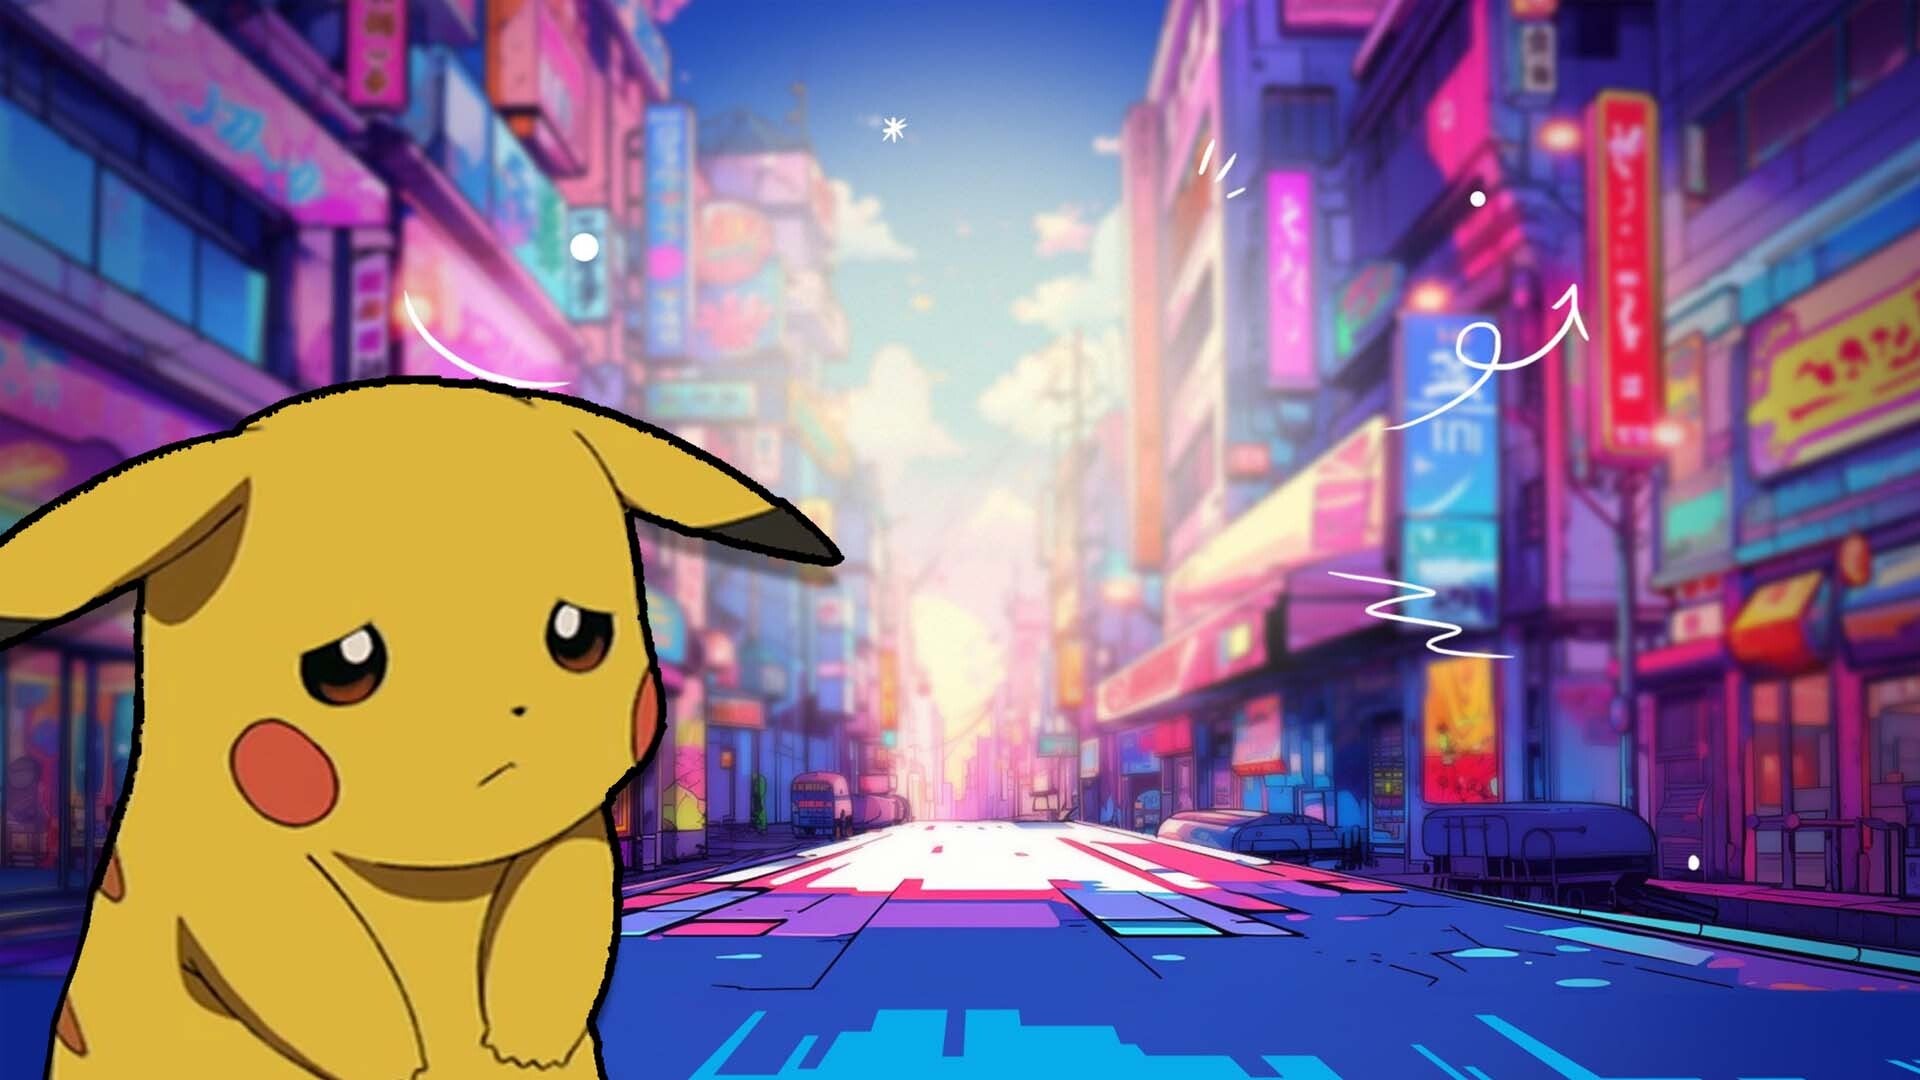 Fans think the latest Pokemon Go artwork was made with AI